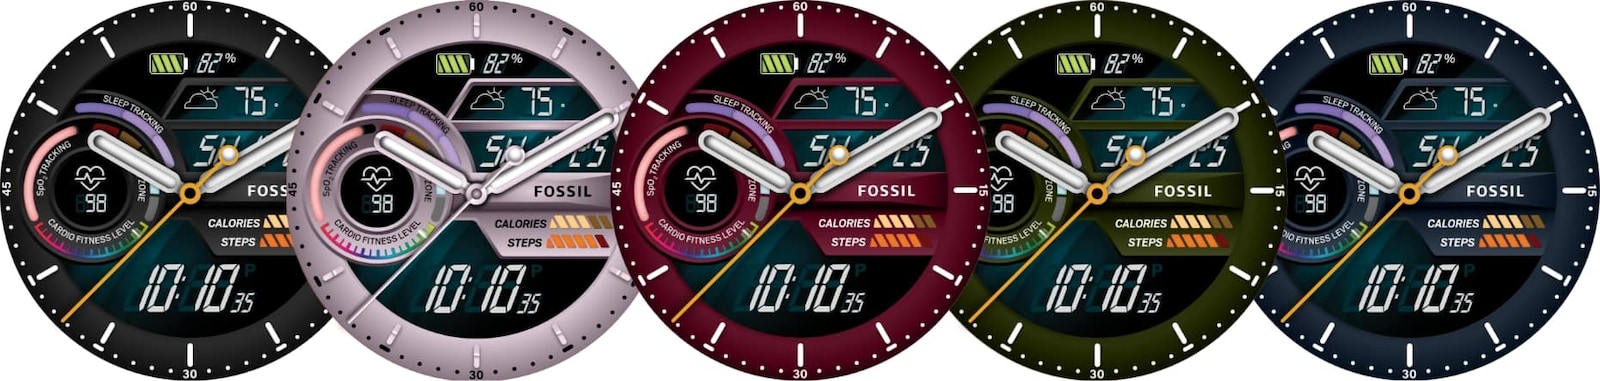 A variety of Fossil Wellness Gauge watch faces, featuring the different customizable dial colors.